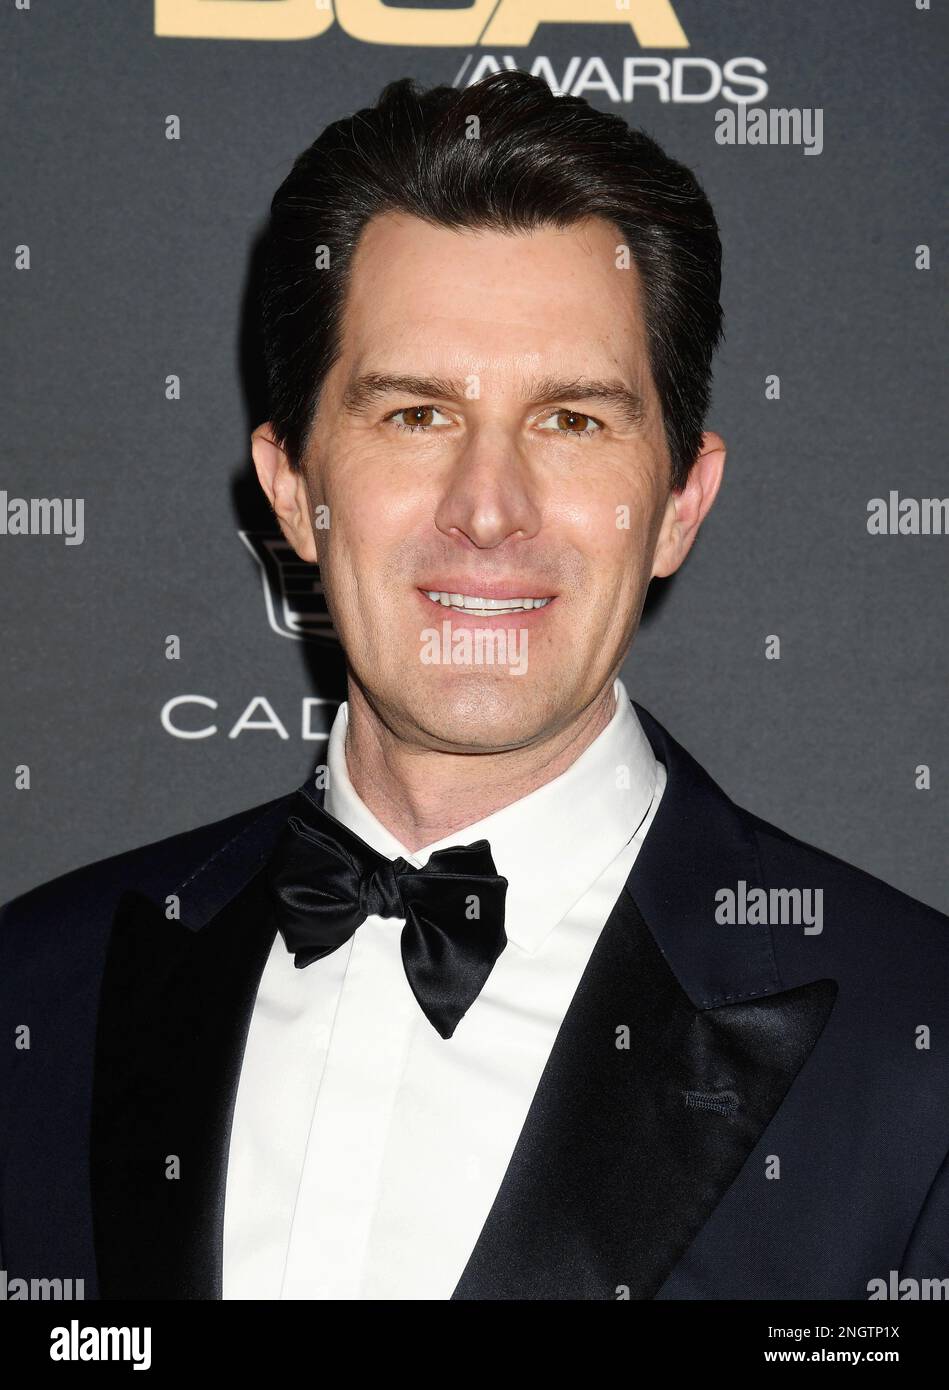 Beverly Hills, California, USA. 18th Feb, 2023. Joseph Kosinski attends the 75th Directors Guild of America Awards at The Beverly Hilton on February 18, 2023 in Beverly Hills, California. Credit: Jeffrey Mayer/Jtm Photos/Media Punch/Alamy Live News Stock Photo